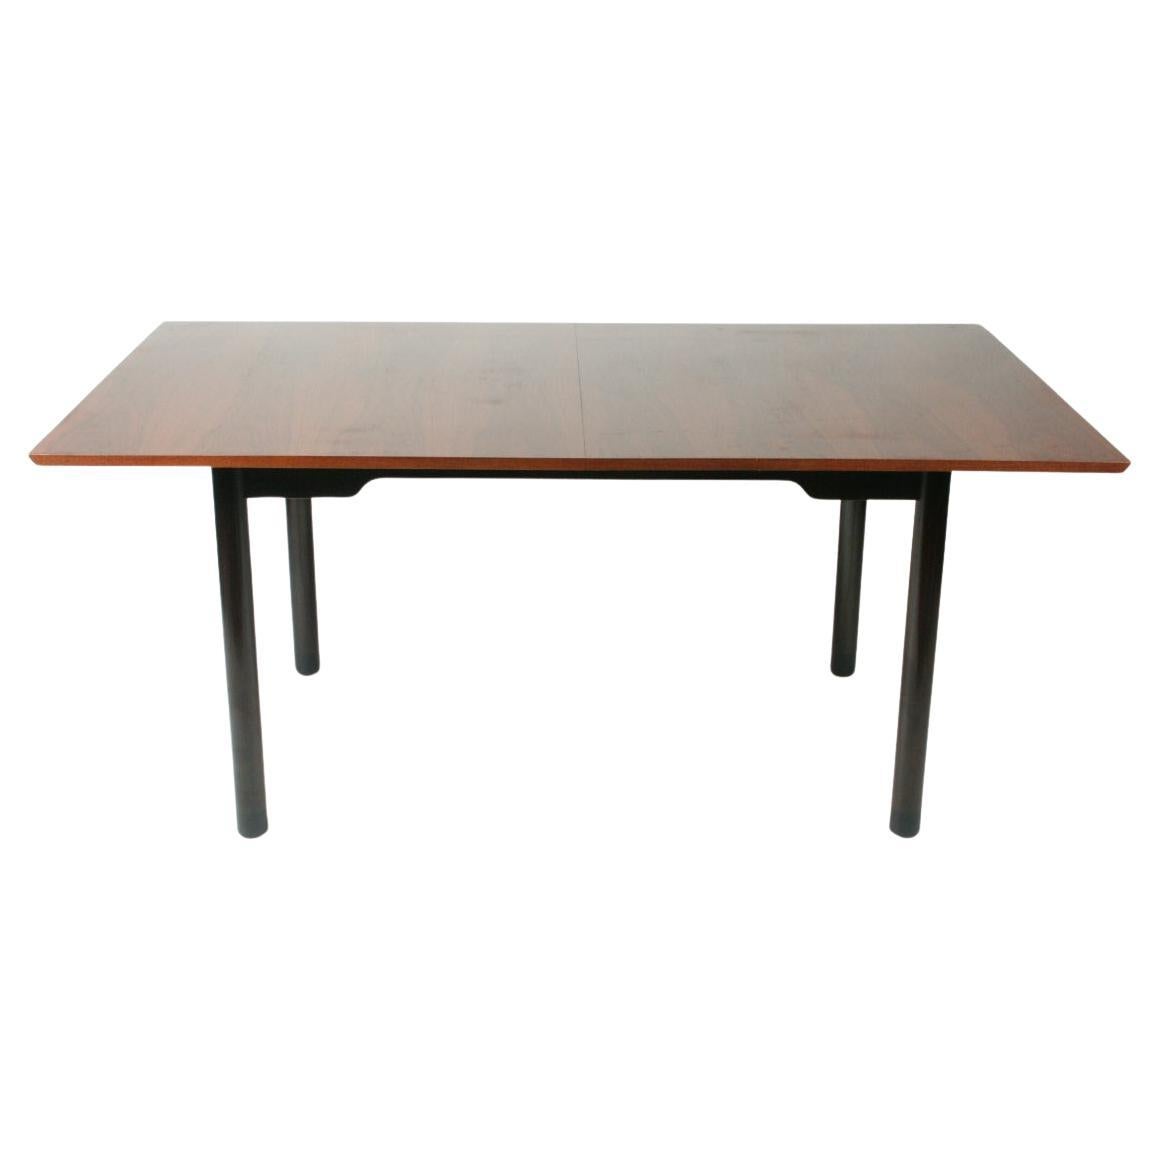  Edward Wormley for Dunbar 1950s Asian Influence Walnut Extension Dining Table For Sale